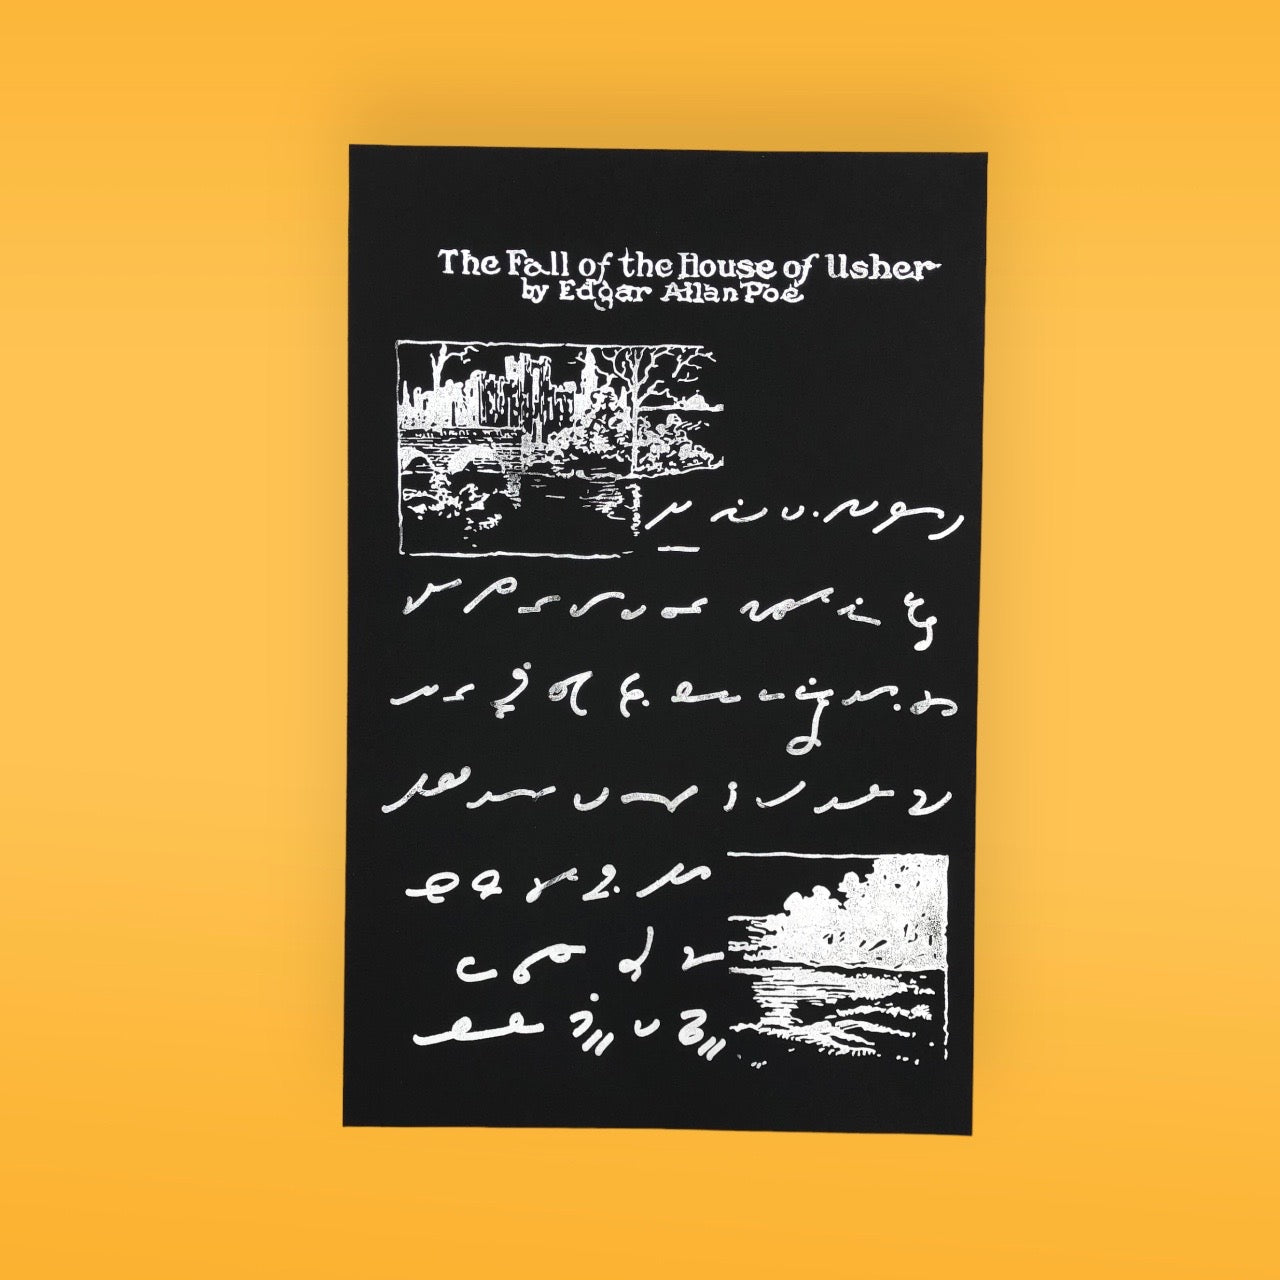 Letterpress Art Poster: "The Fall of the House of Usher" Shorthand